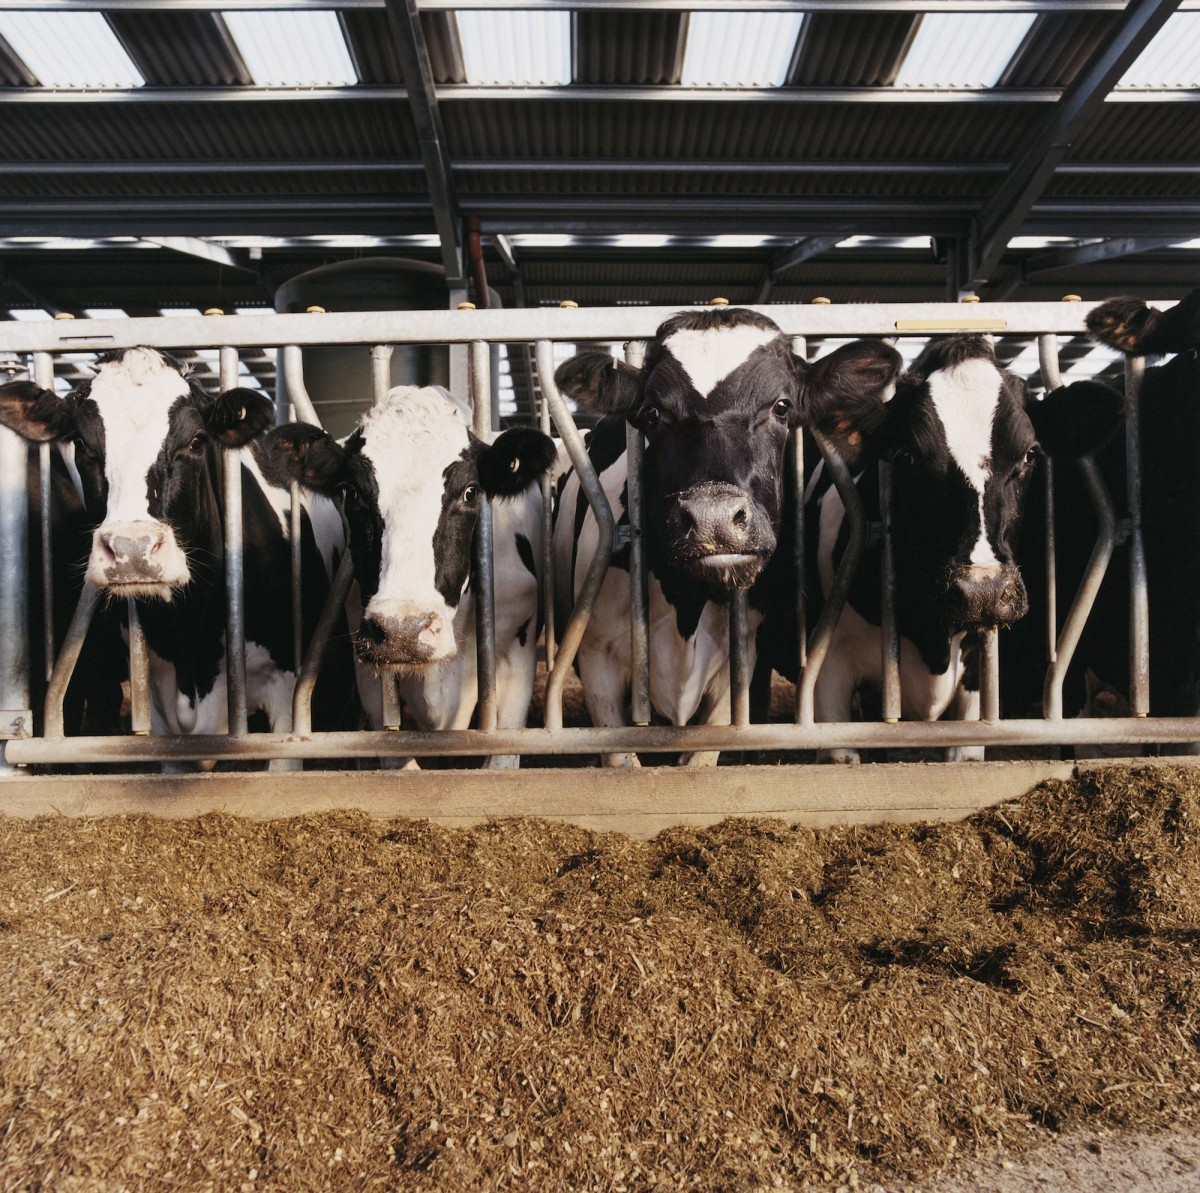 14 Irrefutable Facts About Dairy Farming